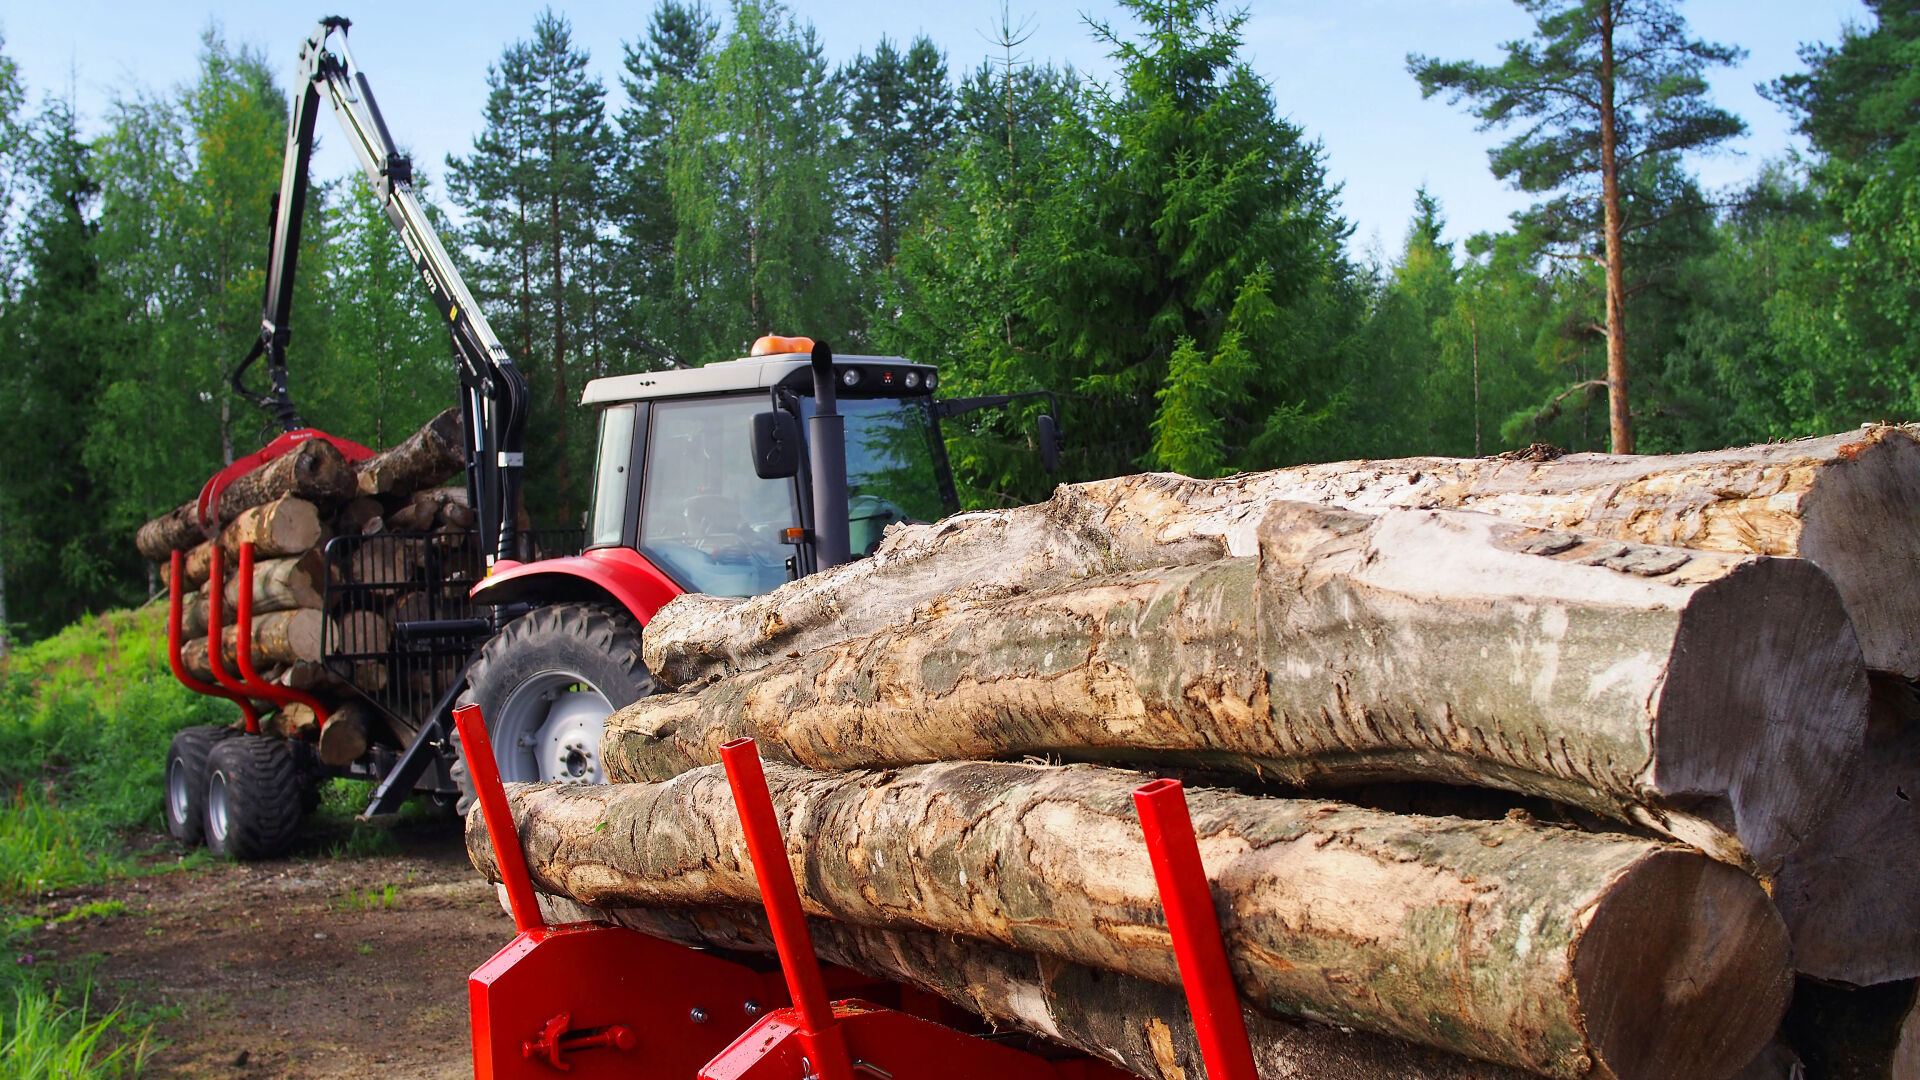 Moving logs with a tractor, professional firewood production setup.